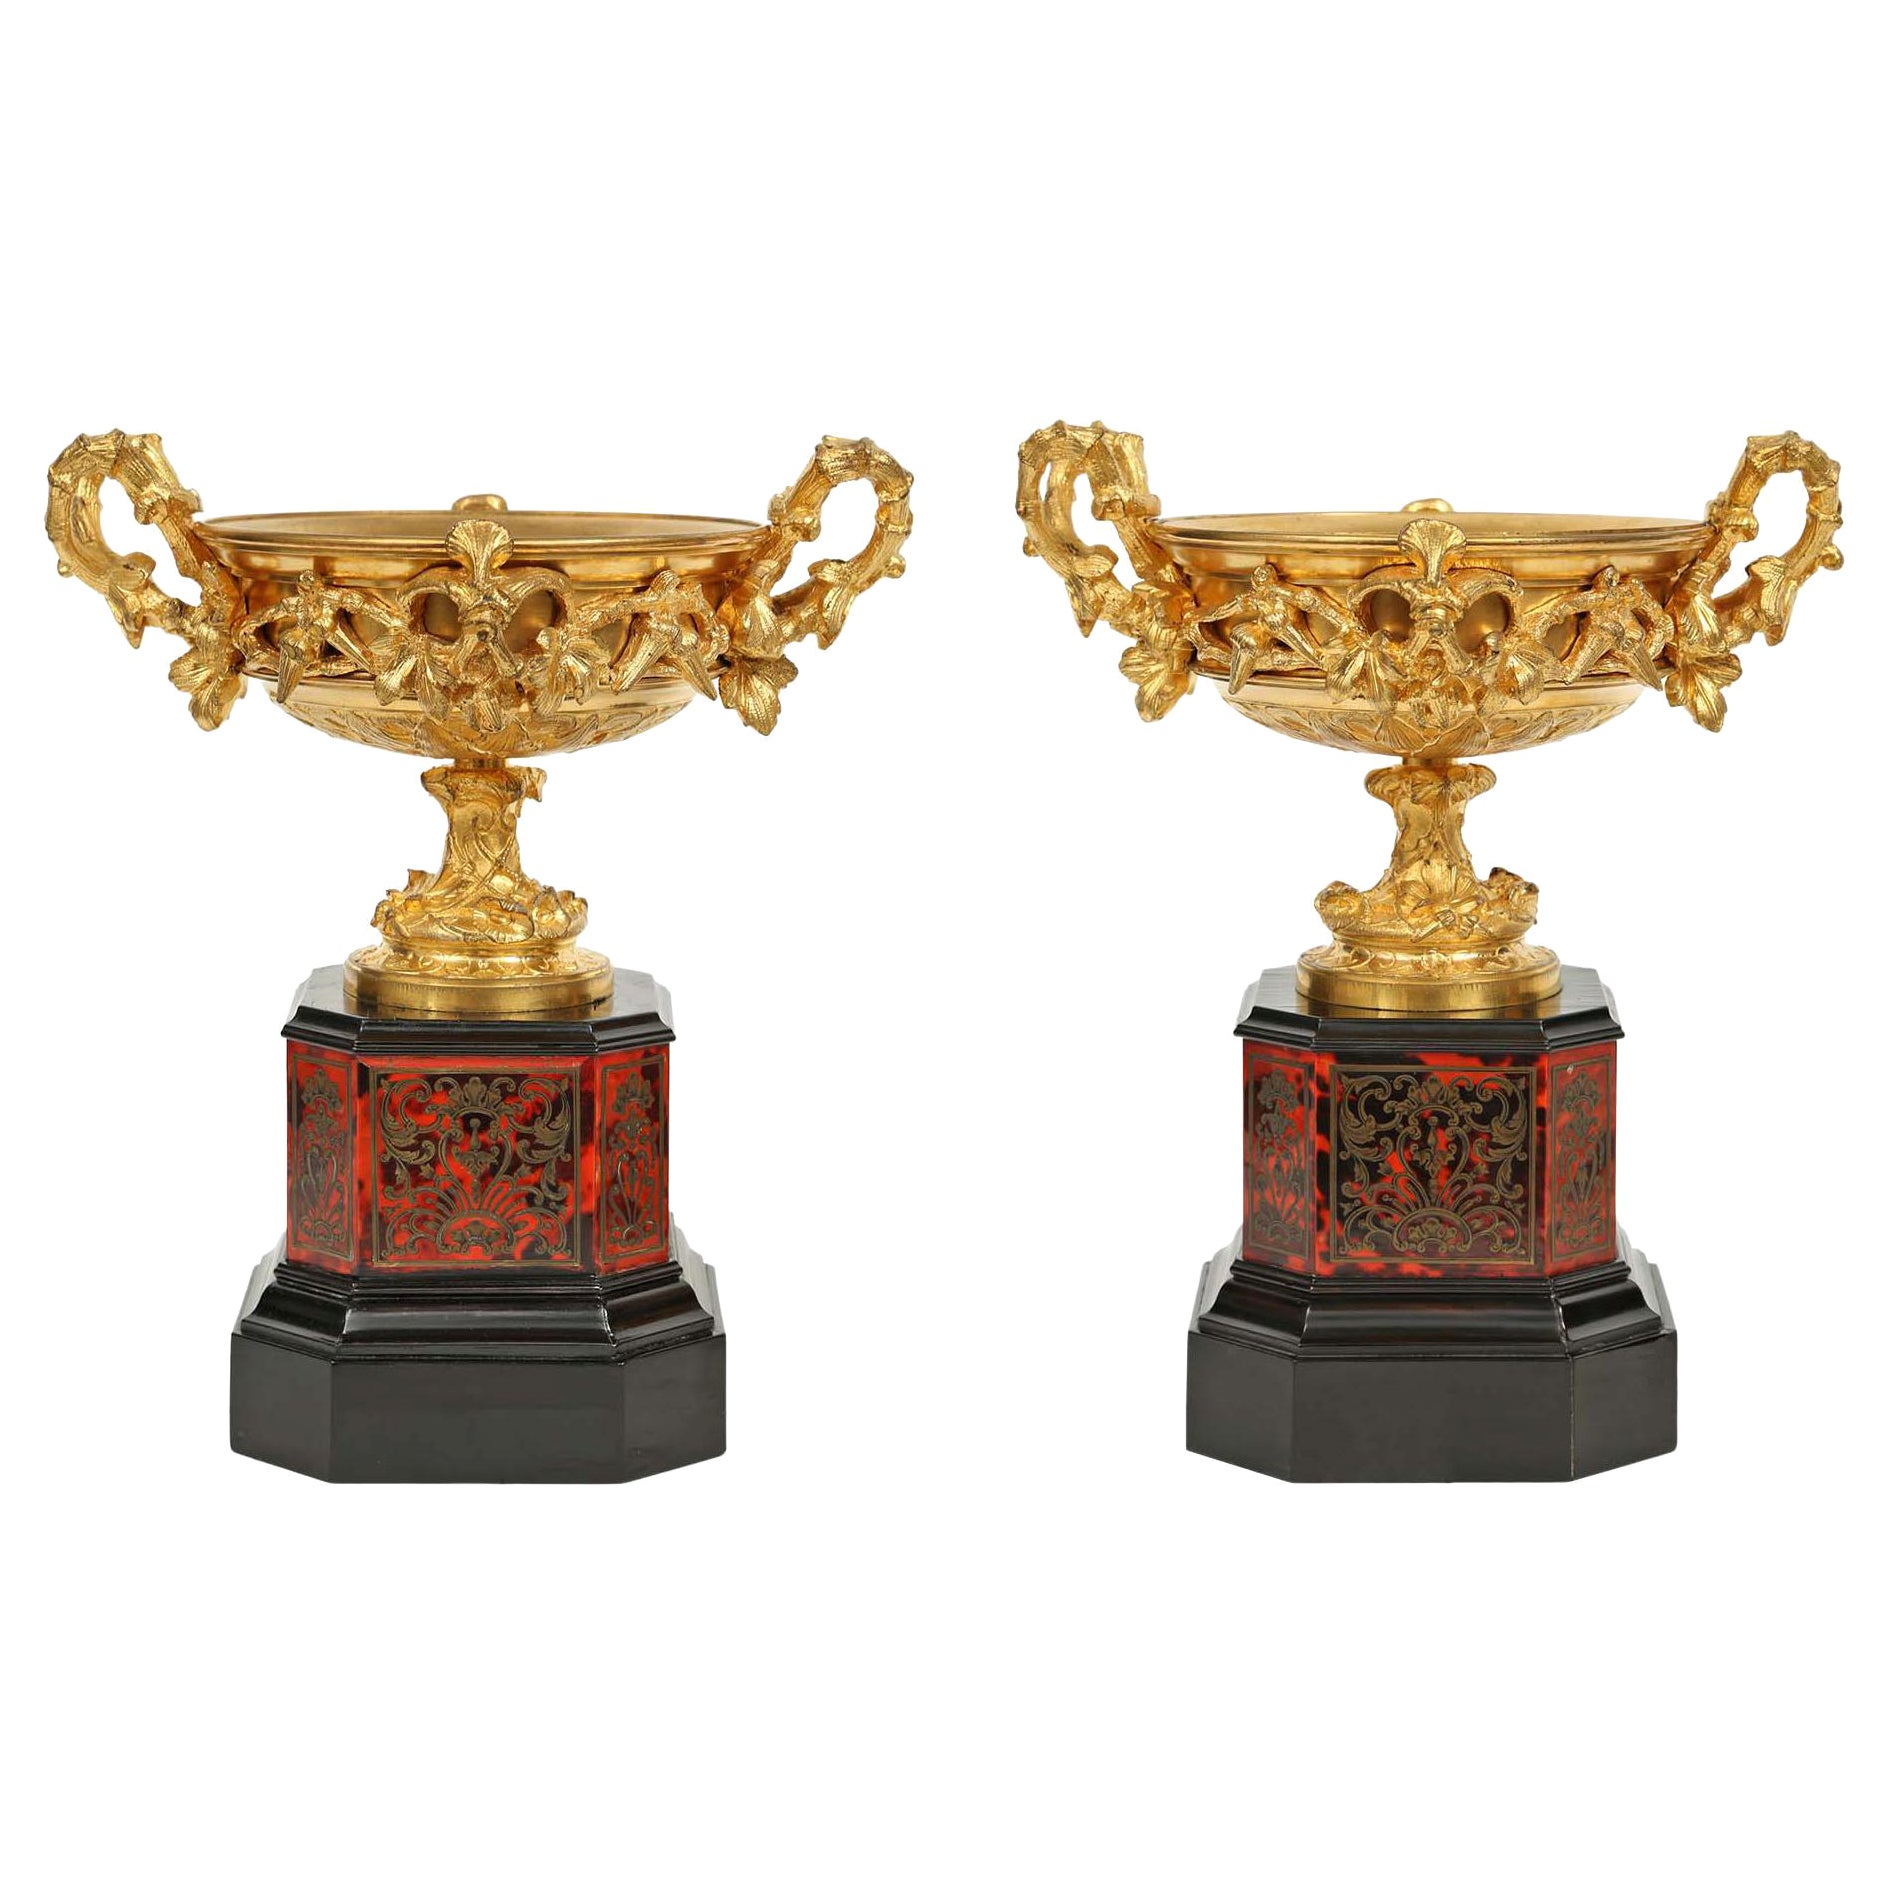 Pair of French Mid-19th Century Napoleon III Period Ormolu Tazzas For Sale